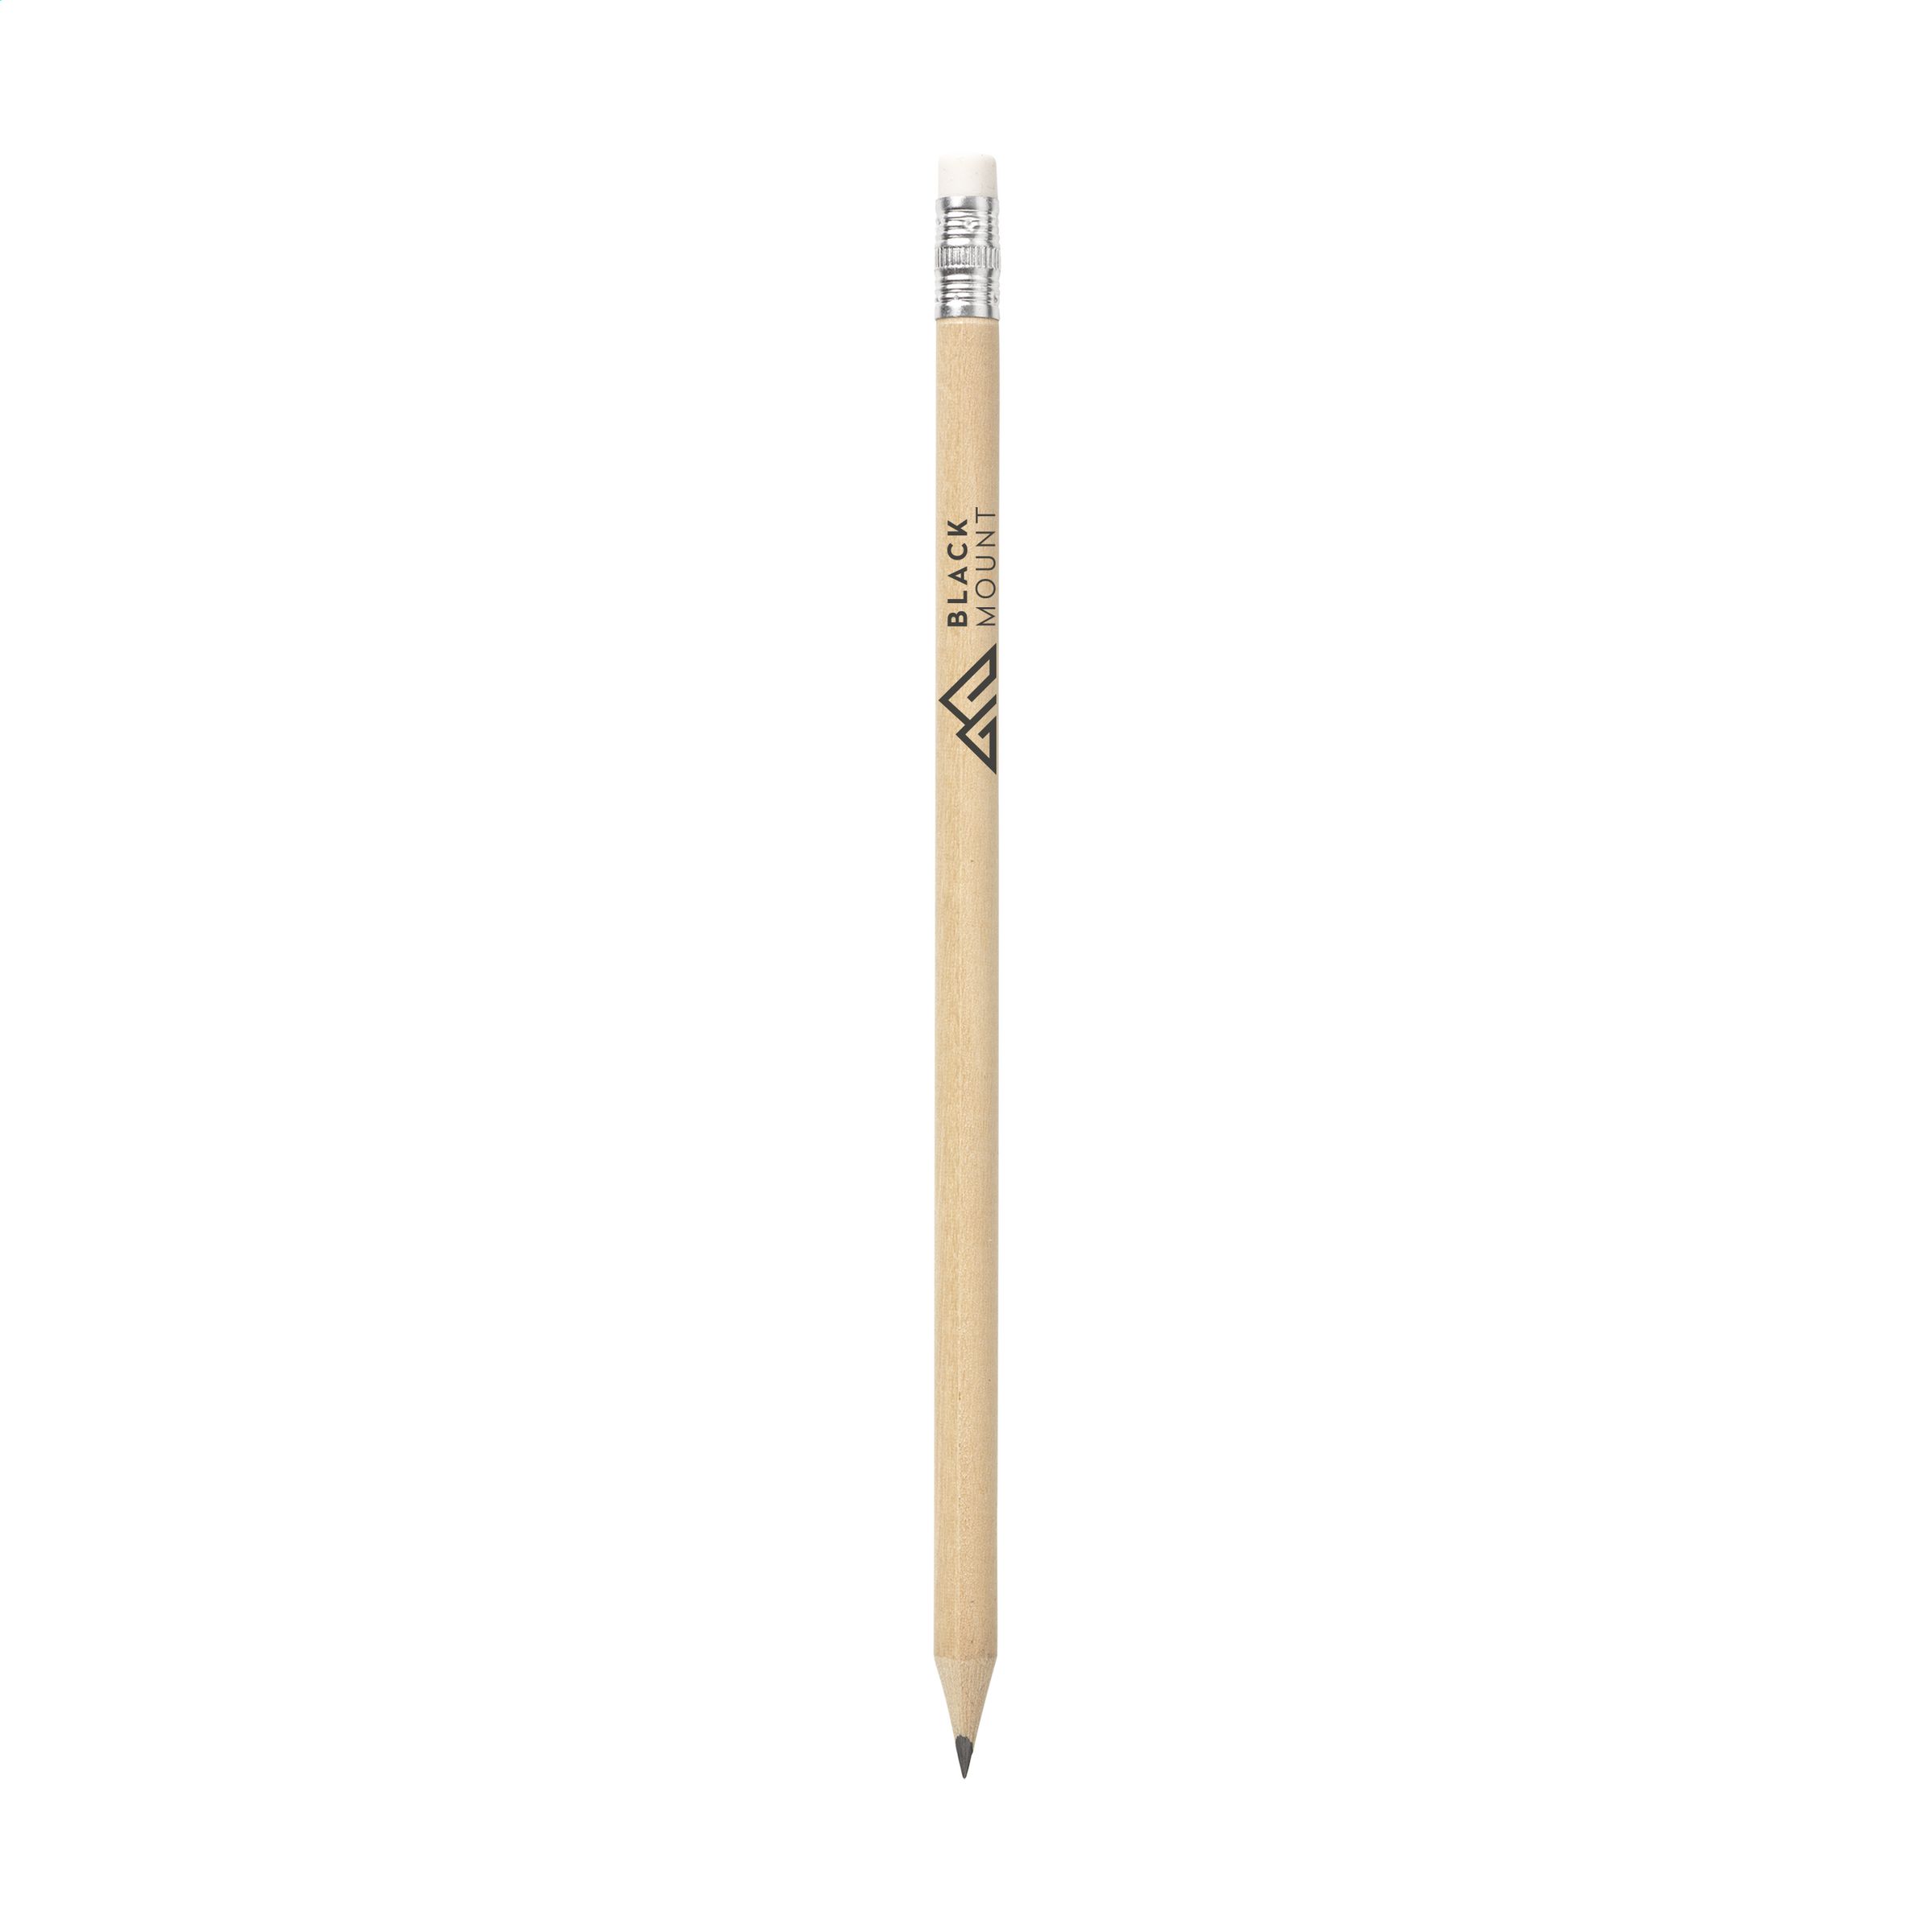 Stoke Poges wooden pencil with eraser - Field Dalling